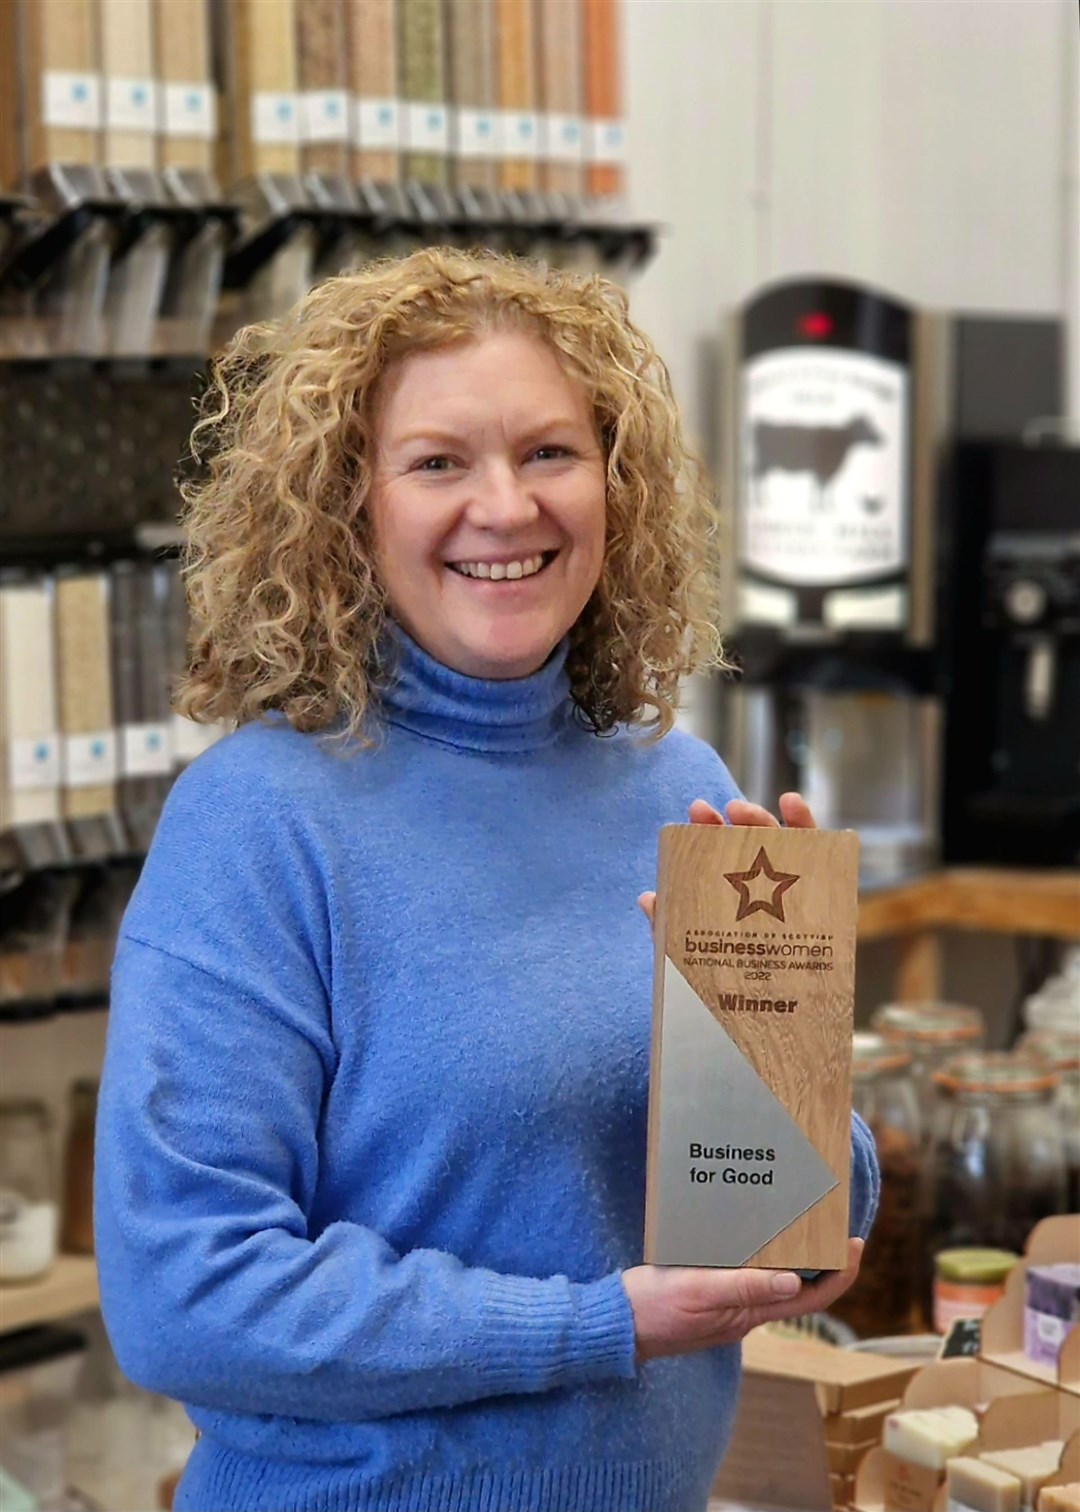 Alison Ruickbie of The ReStore in Lossiemouth was crowned winner in the Business for Good category at a national awards ceremony earlier this month.